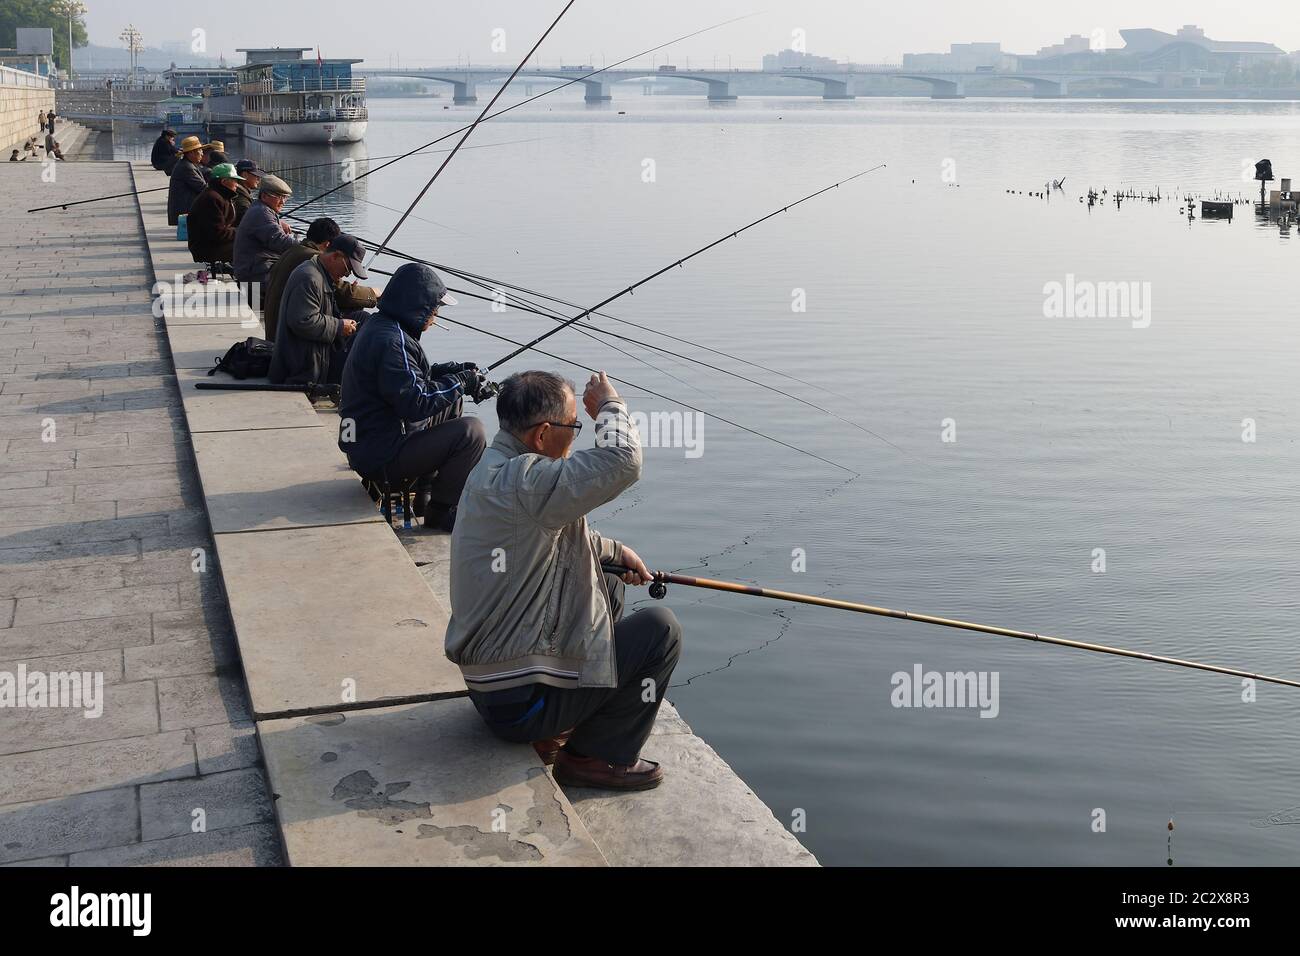 Pyongyang, North Korea - May 1, 2019: Local fishermen catch a fish on waterfront on Kim Il Sung square at the sunrise Stock Photo